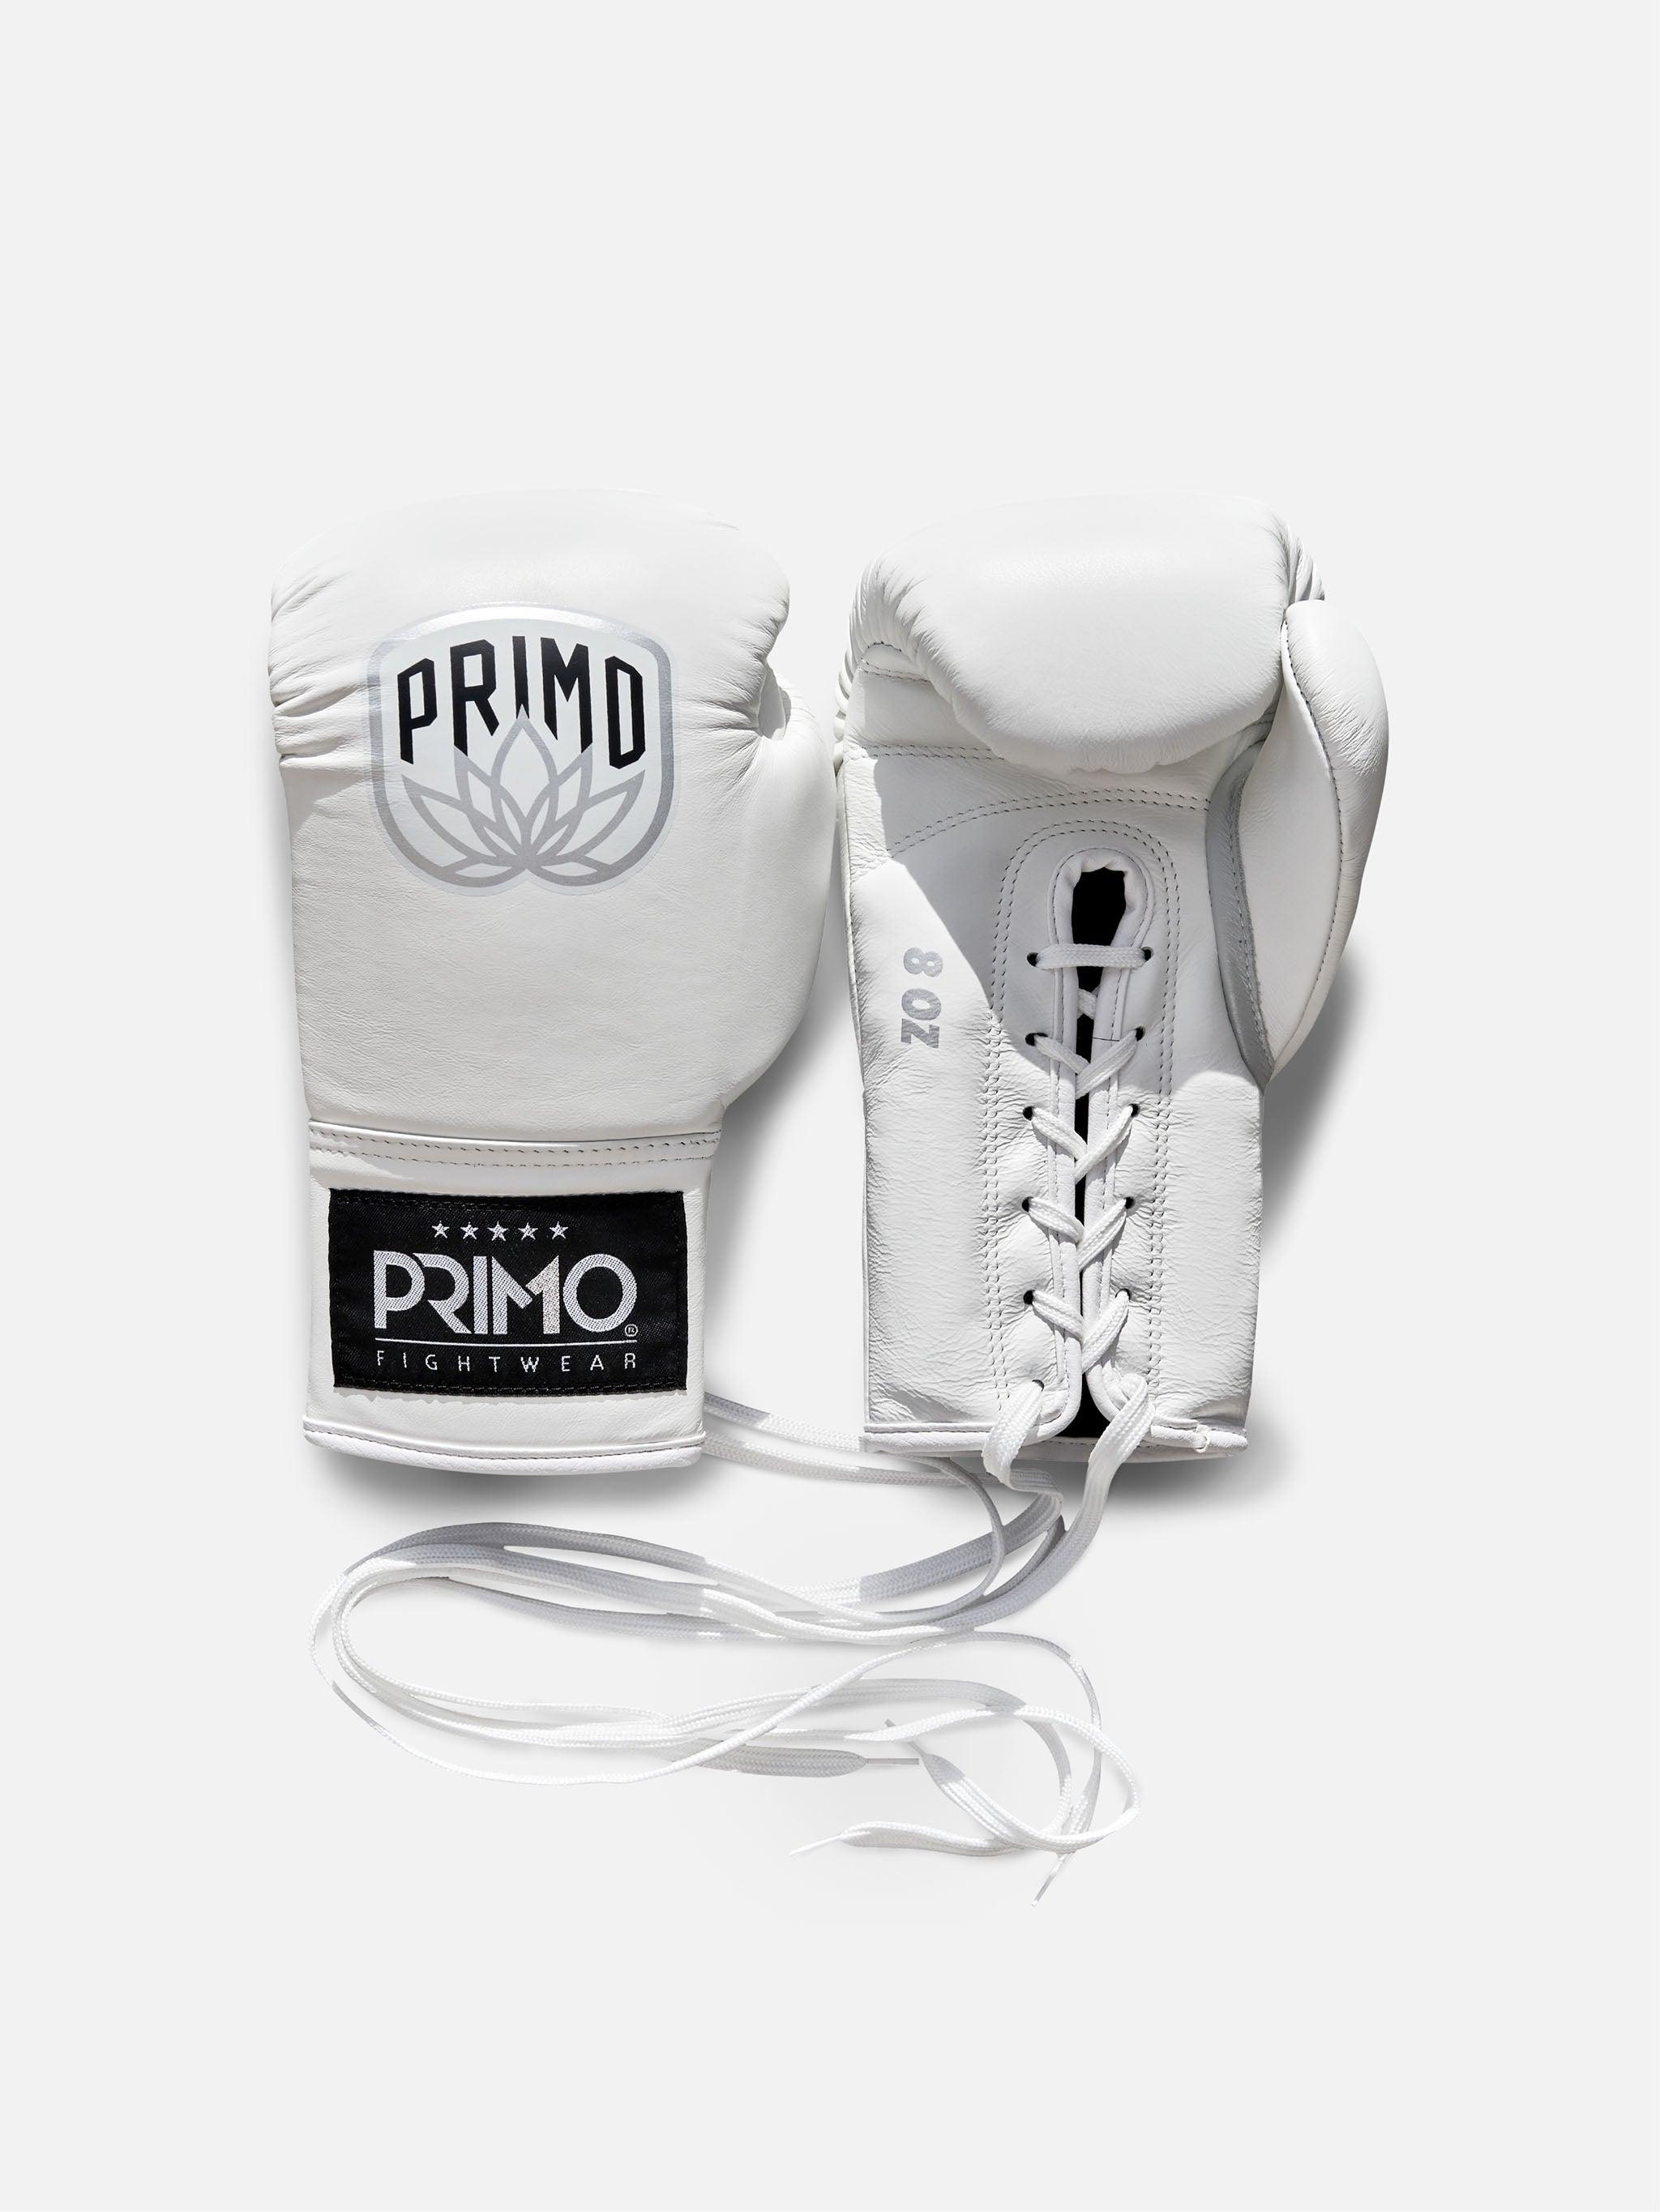 Primo Lace Up Muay Thai Gloves - White - Muay Thailand